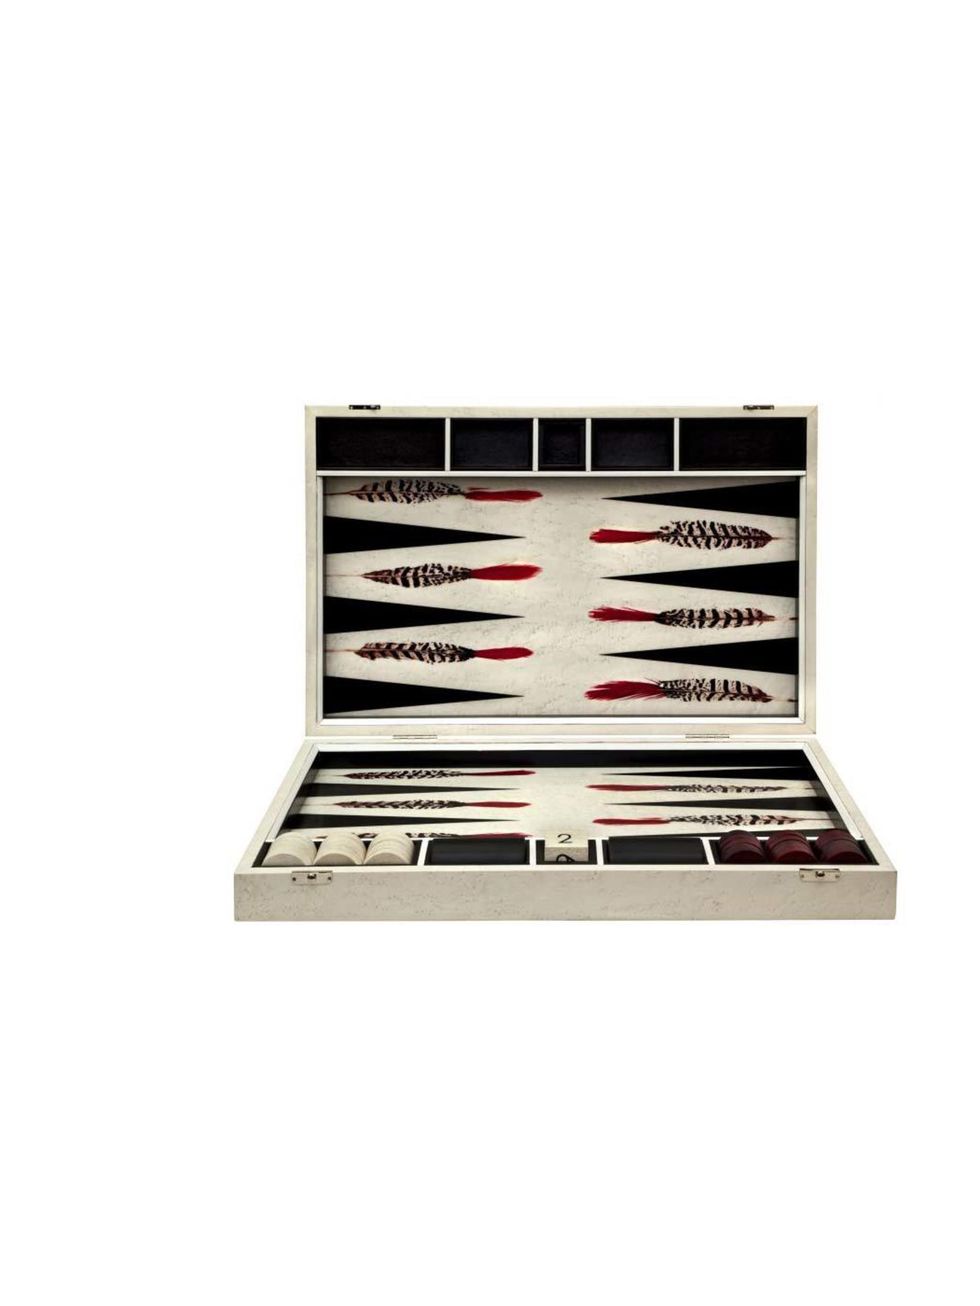 <p>Here's a present a princess can share with her prince!</p><p>Alexandra Llewellyn Design backgammon board, £2100 at <a href="http://www.quintessentiallygifts.com/alexandra-llewellyn-design-black-and-white-feather-backgammon-board-27">Quintessentially Gi